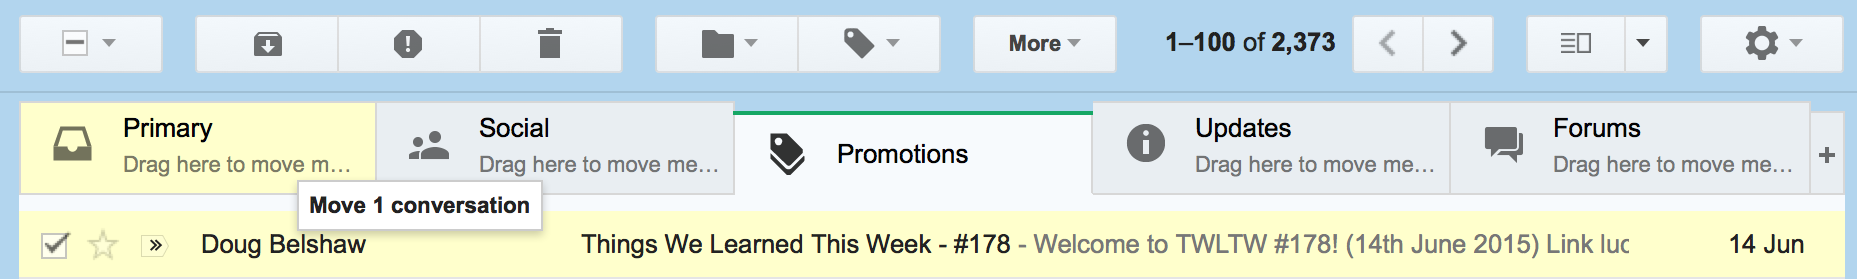 Promotions --> Primary